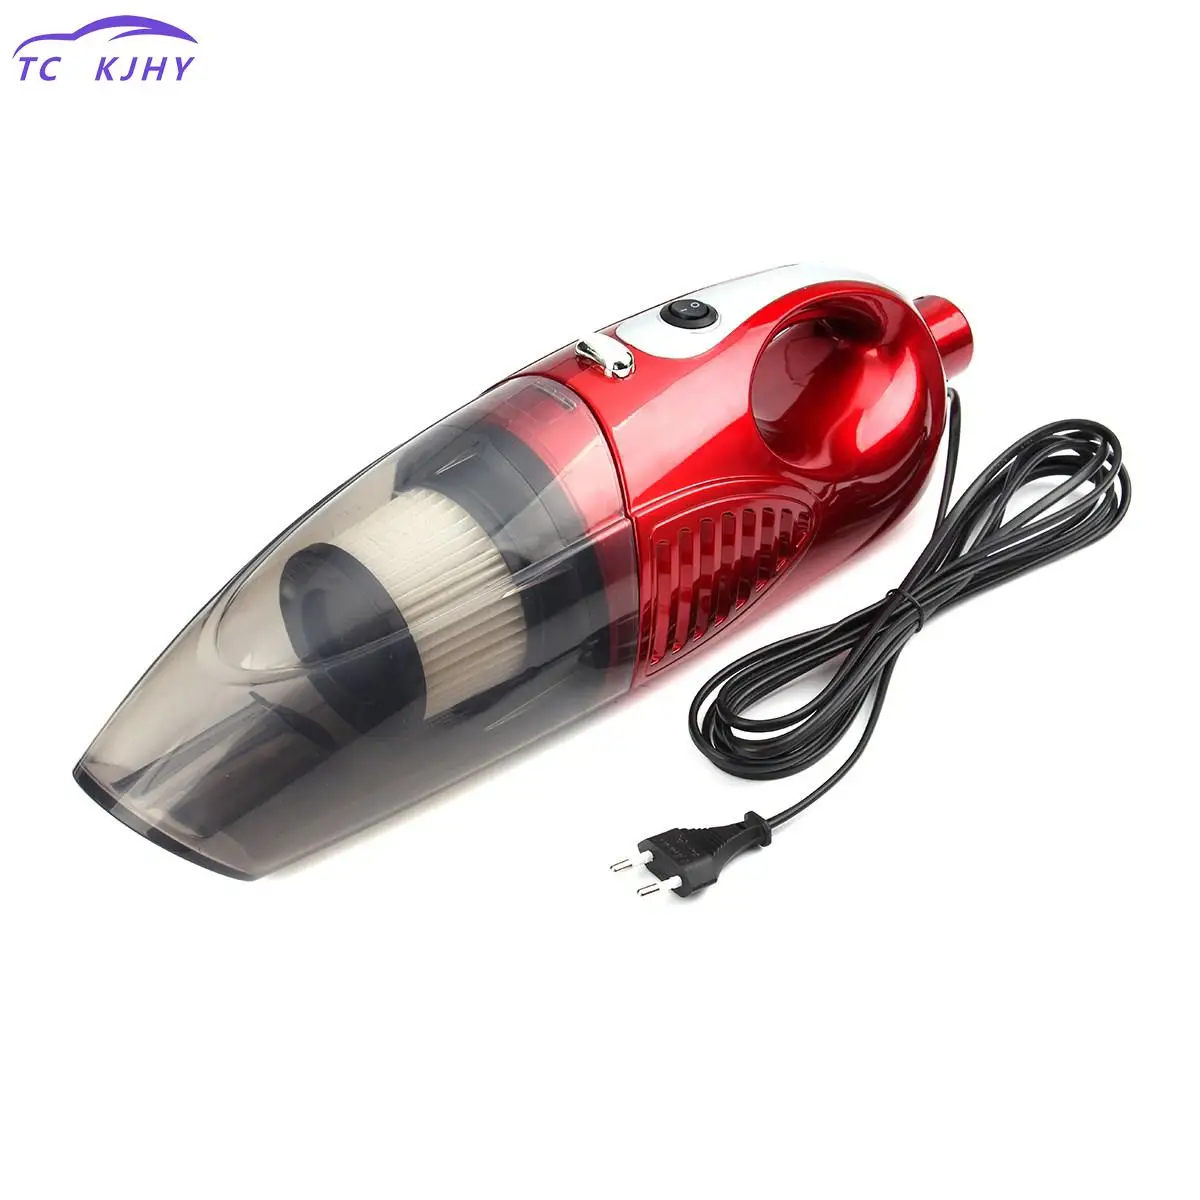 

2018 Auto Wet And Dry Dual Use 1200w Household Car Home Vacuum Cleaner Hand Held Portable Upright Bagless Lightweight Cleaner